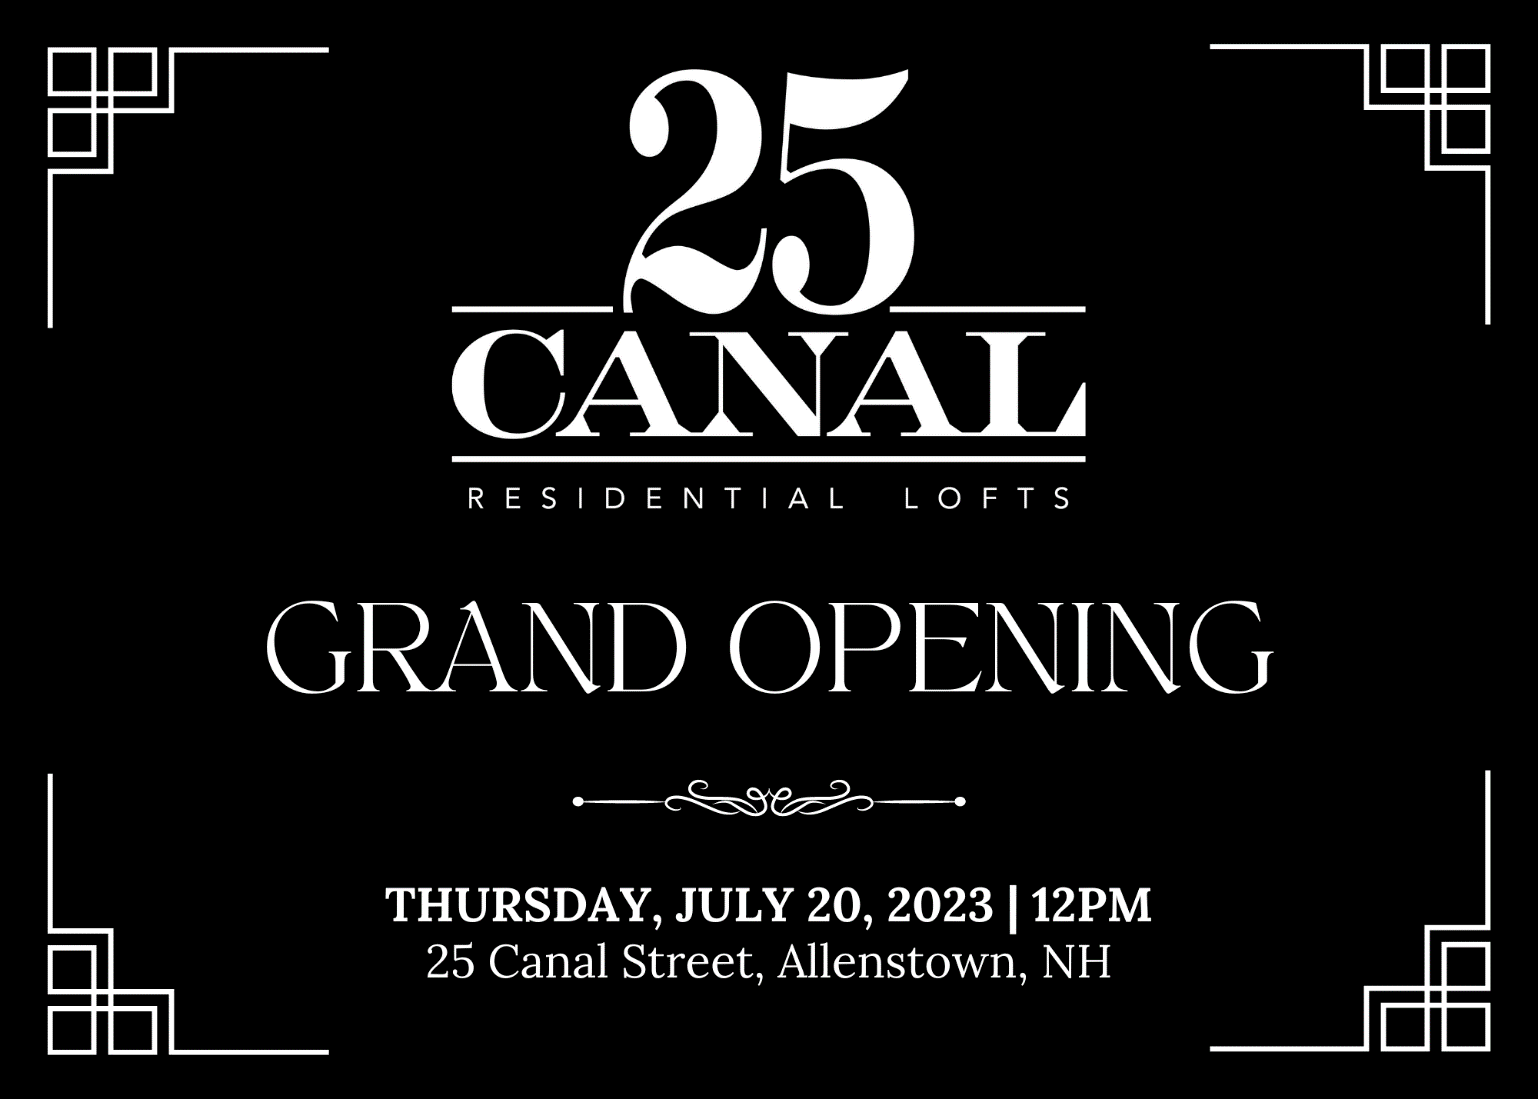 25 Canal Grand Opening